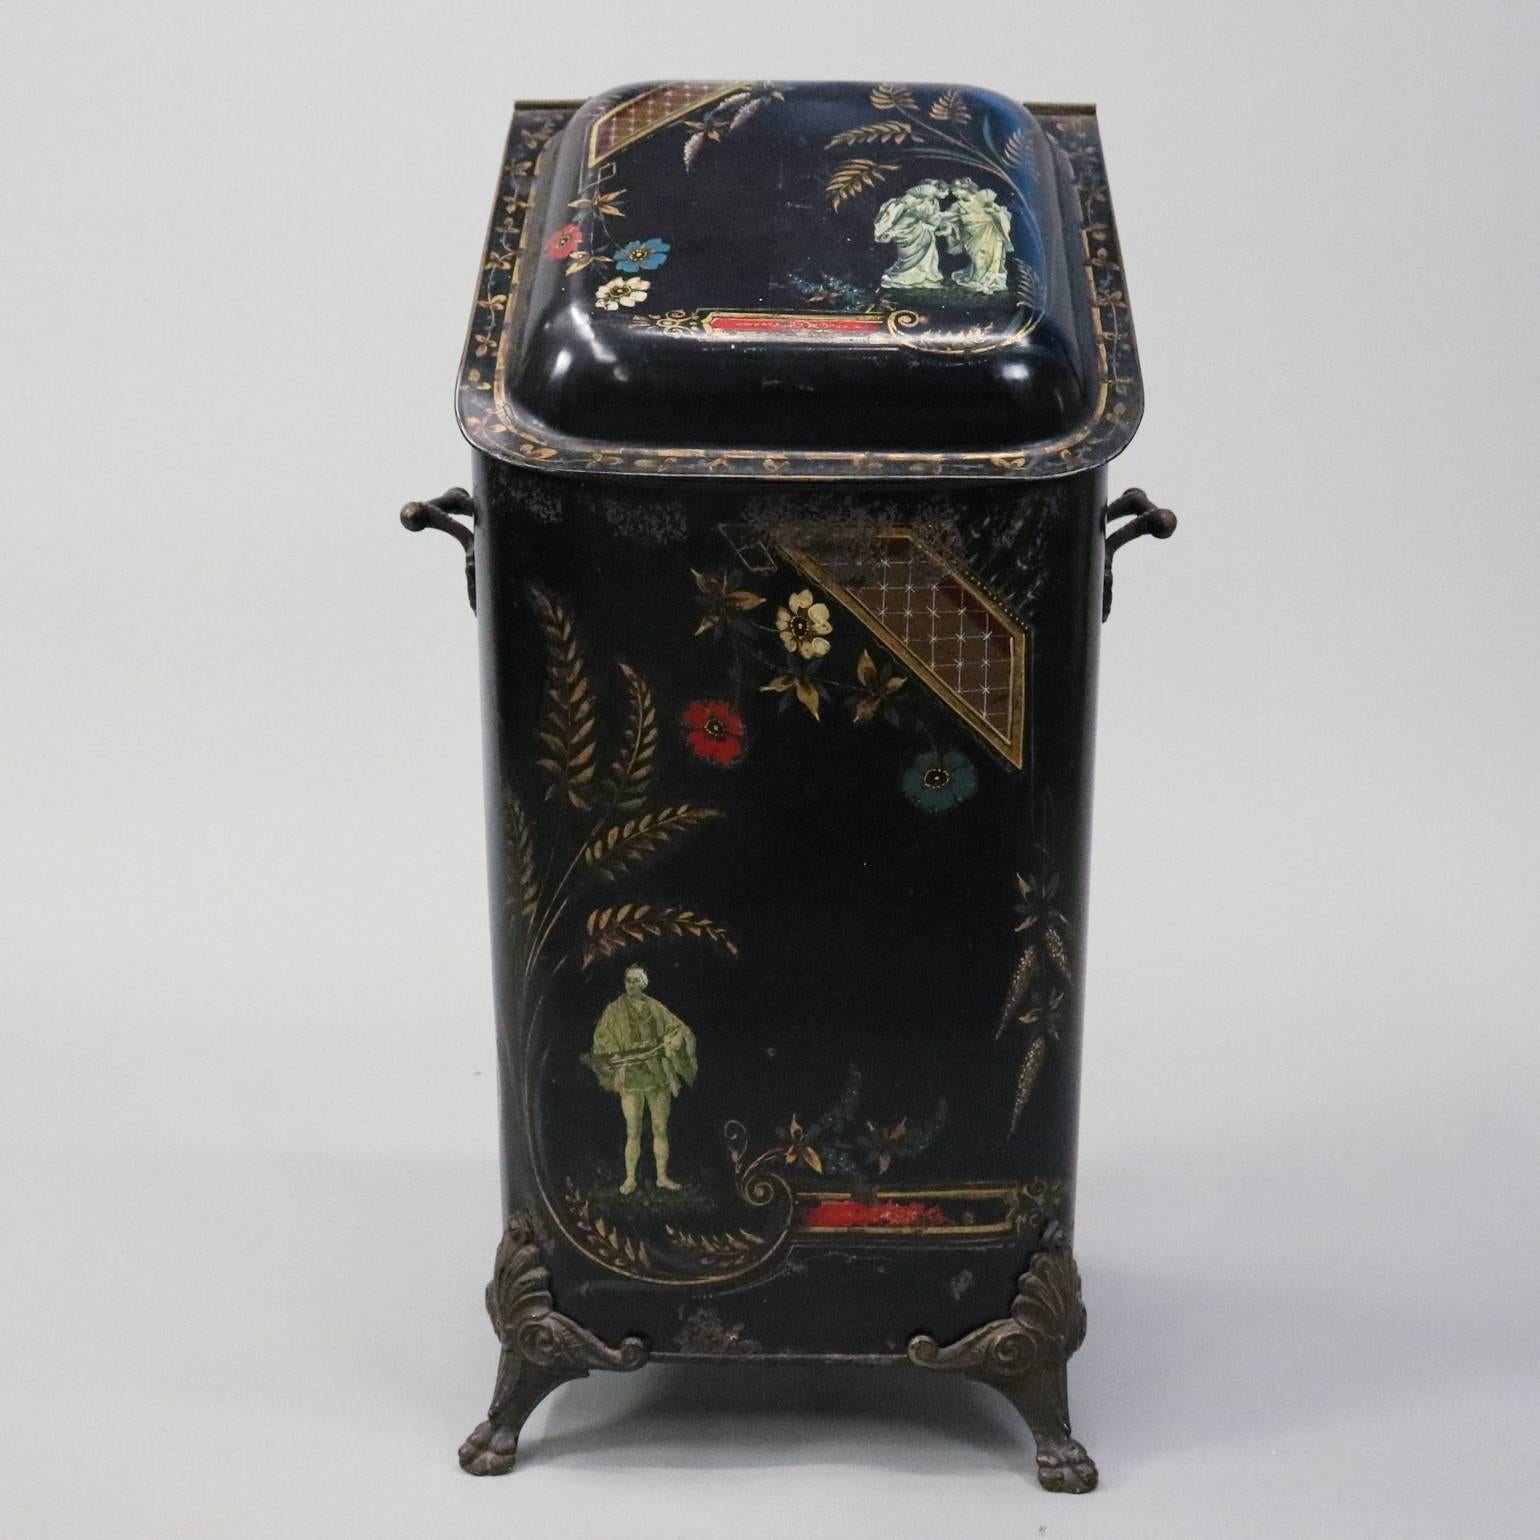 Antique Chinoiserie decorated English coal scuttle features hand-painted gilt foliate decoration, polychrome floral and music man and two whispering ladies; seated on cast paw feet and side handles, circa 1890

Measures: 25" H x 14" W x